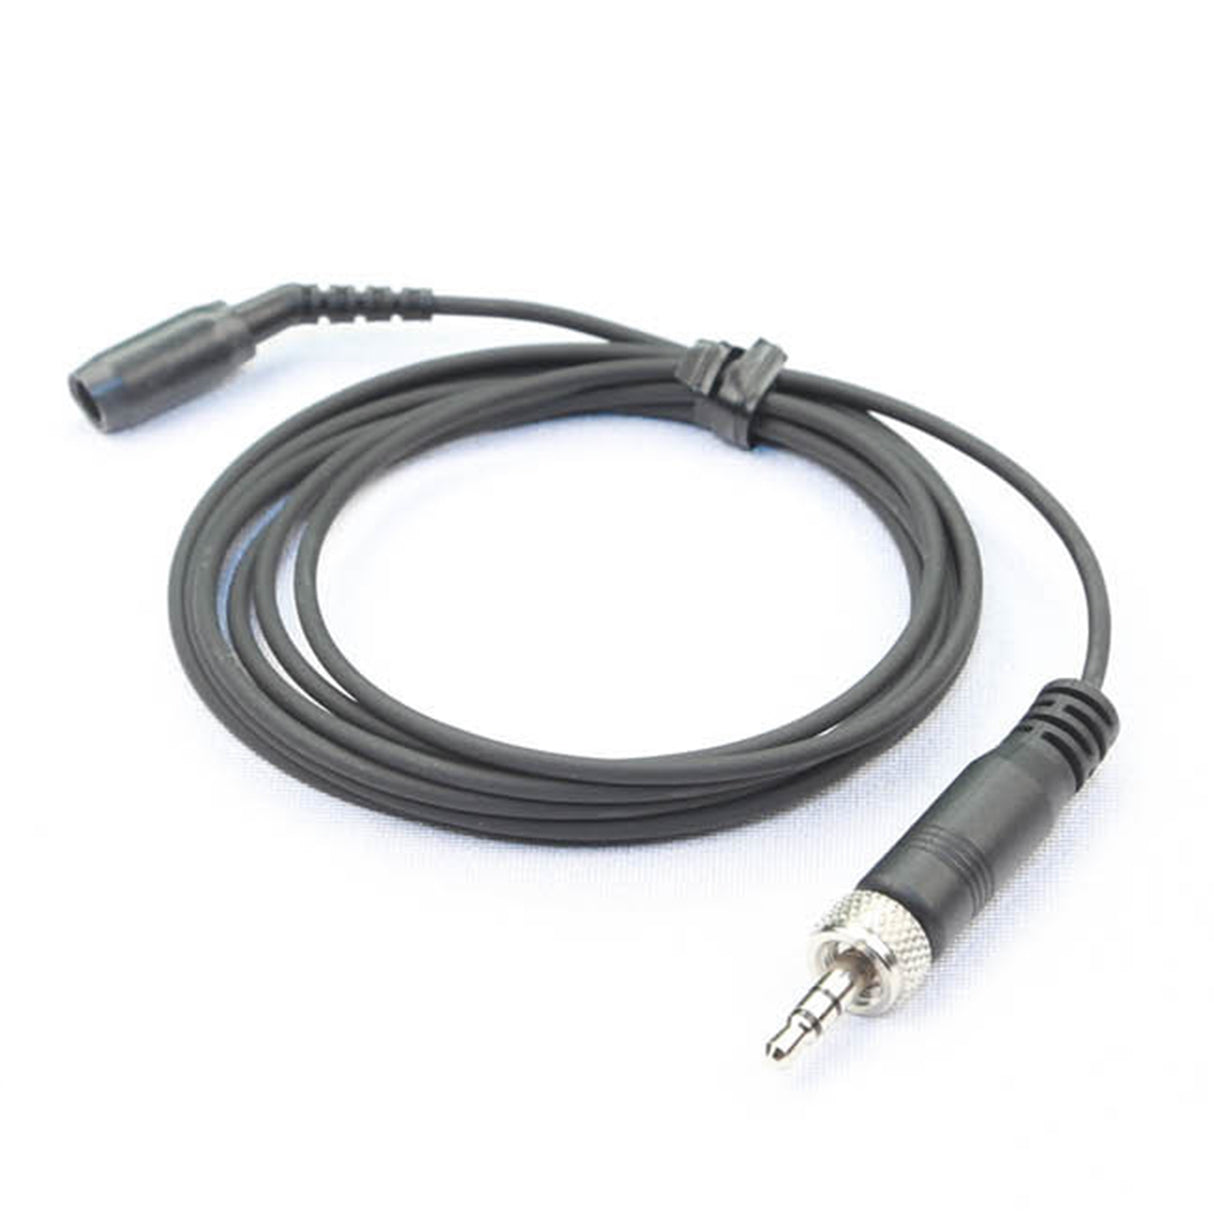 Sennheiser 511719 MKE Platinum Cable with 3.5mm Connector, Black